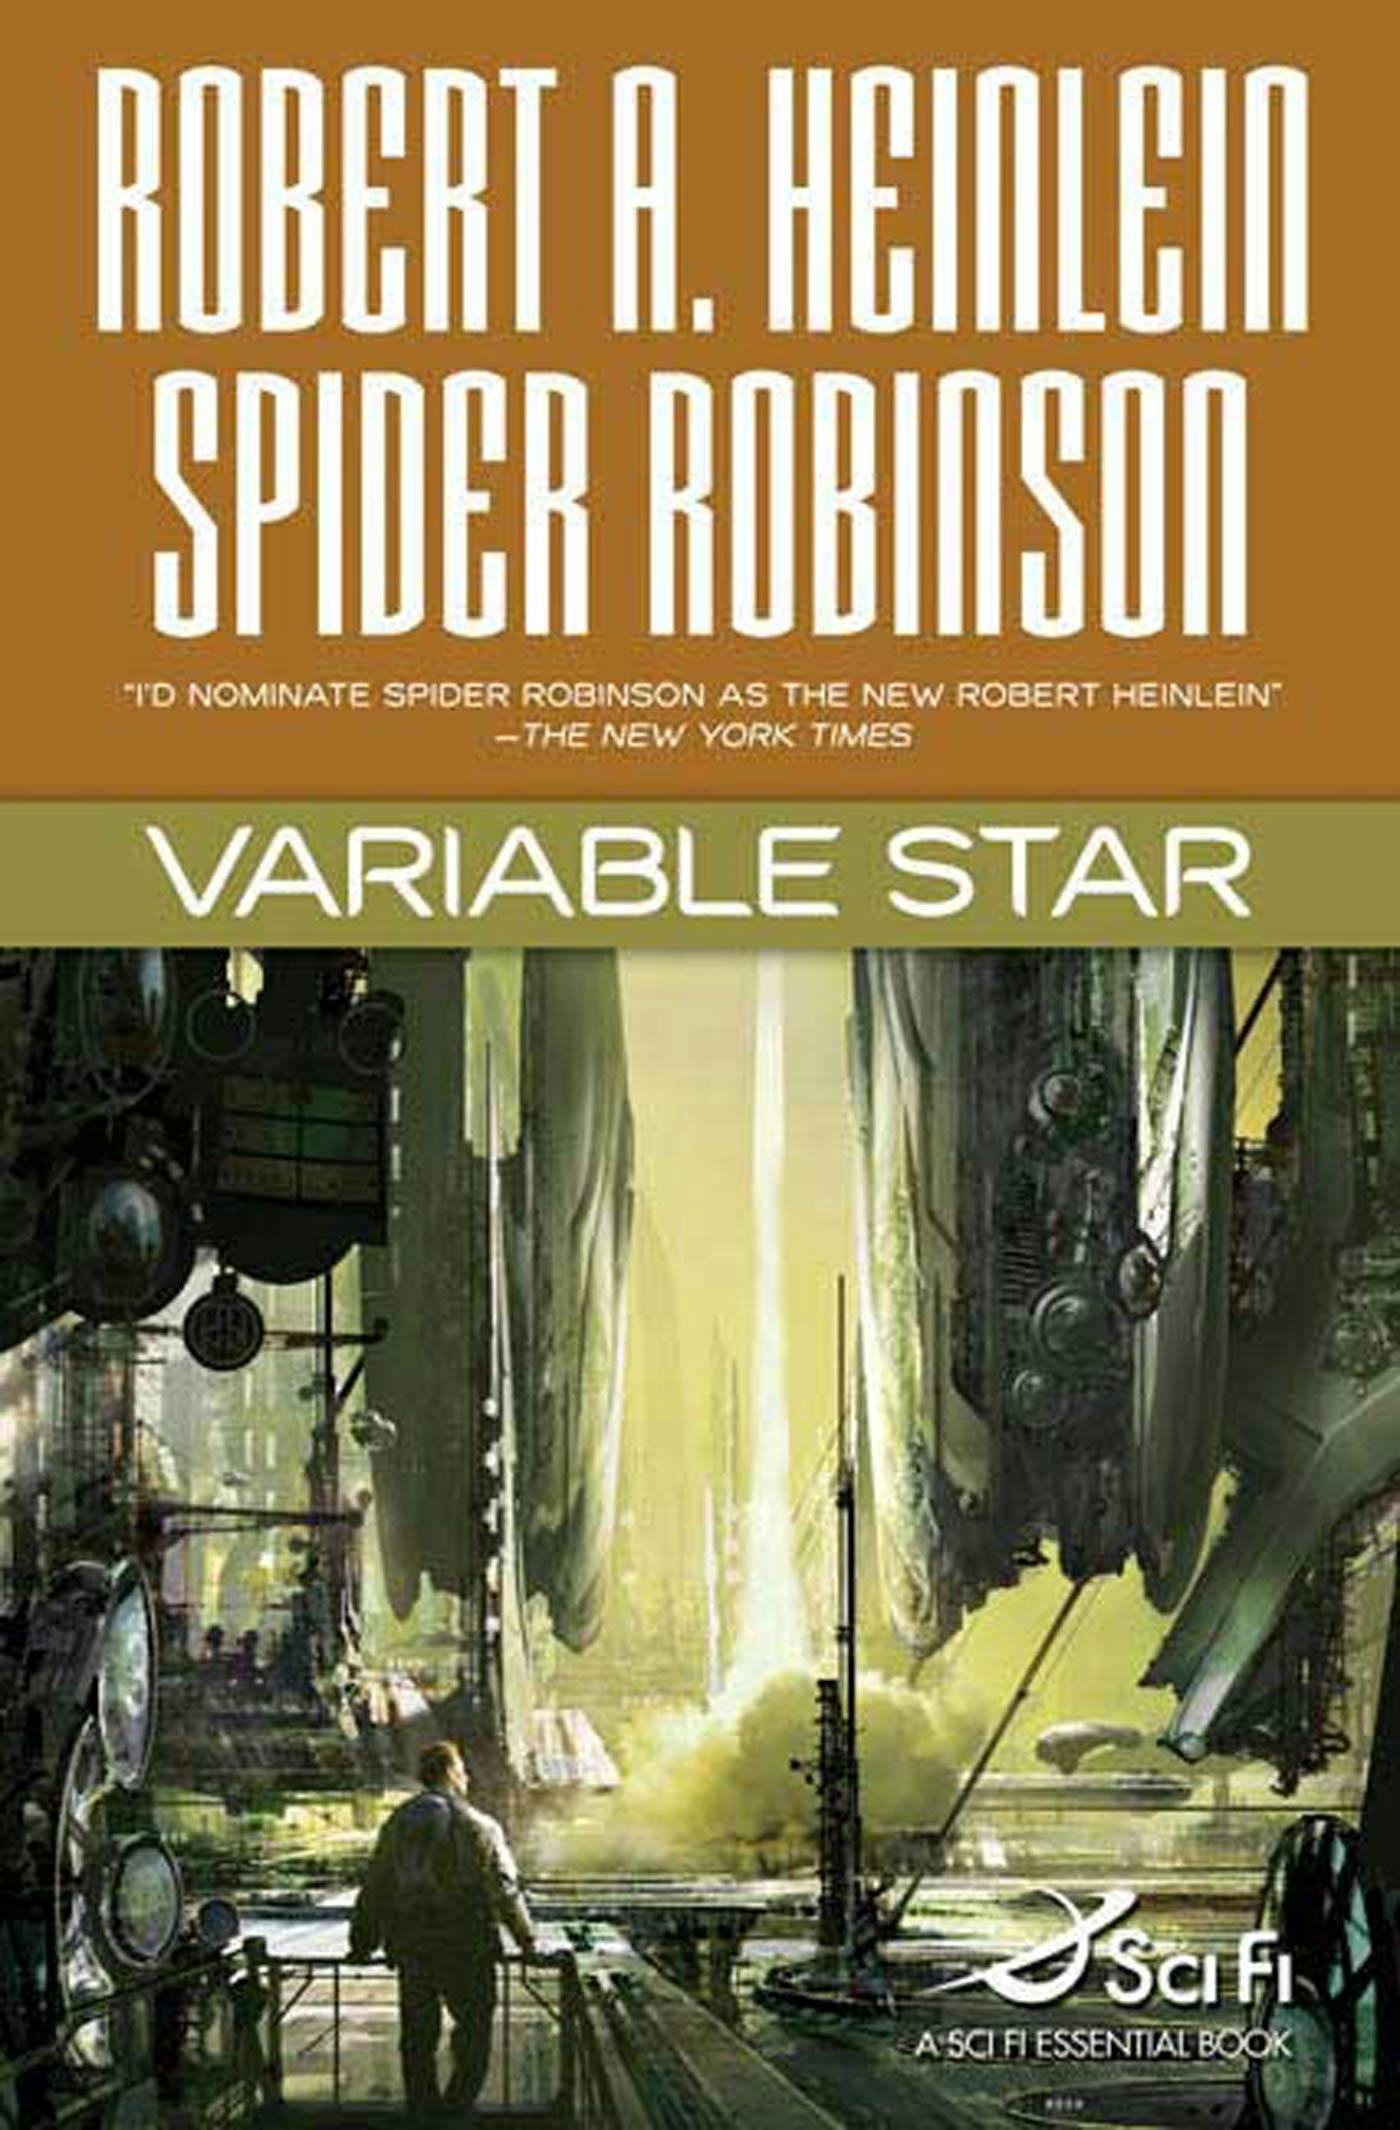 Cover for the book titled as: Variable Star